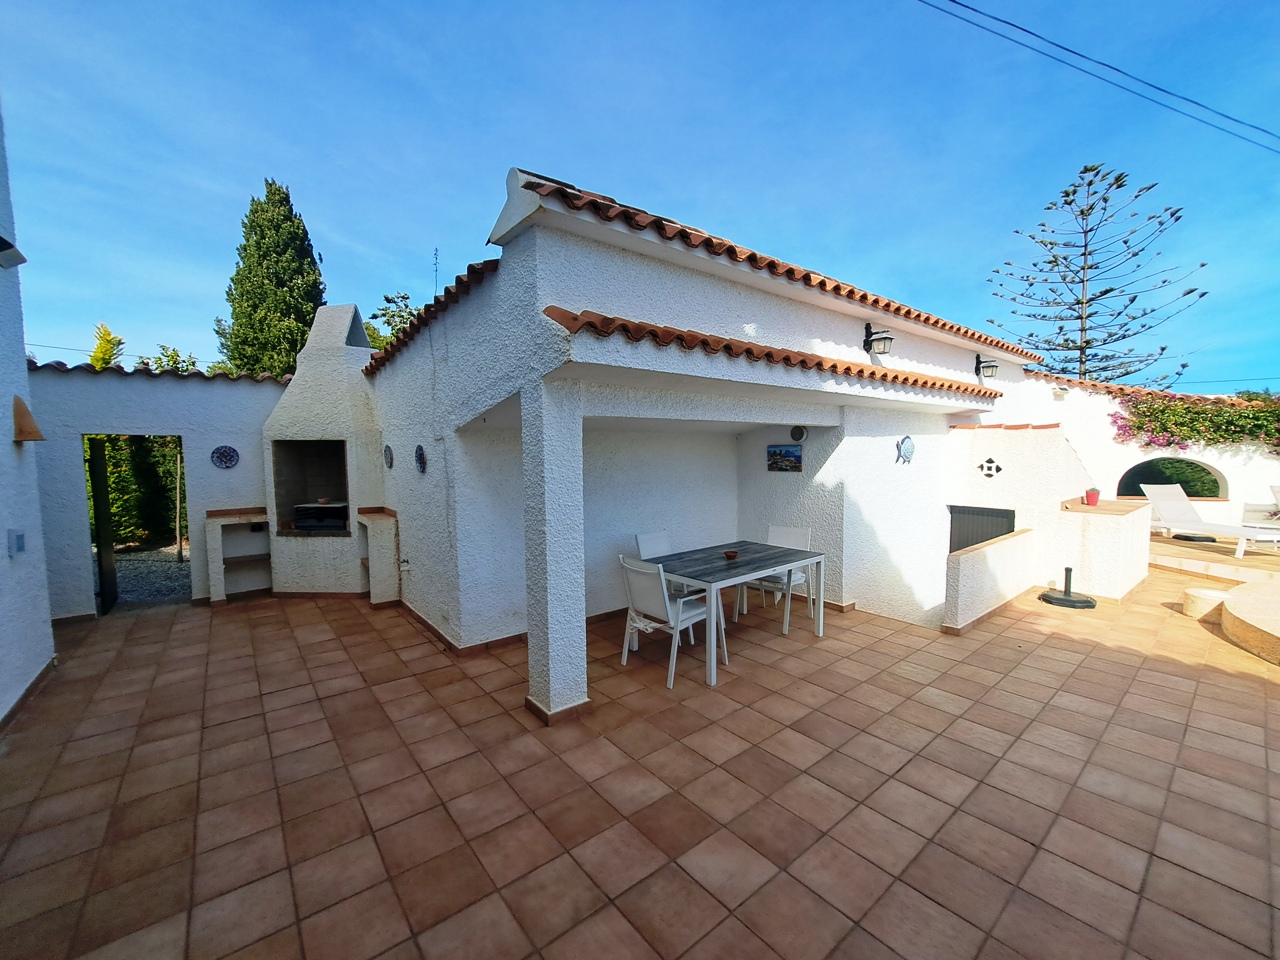 Fantastic well maintained villa